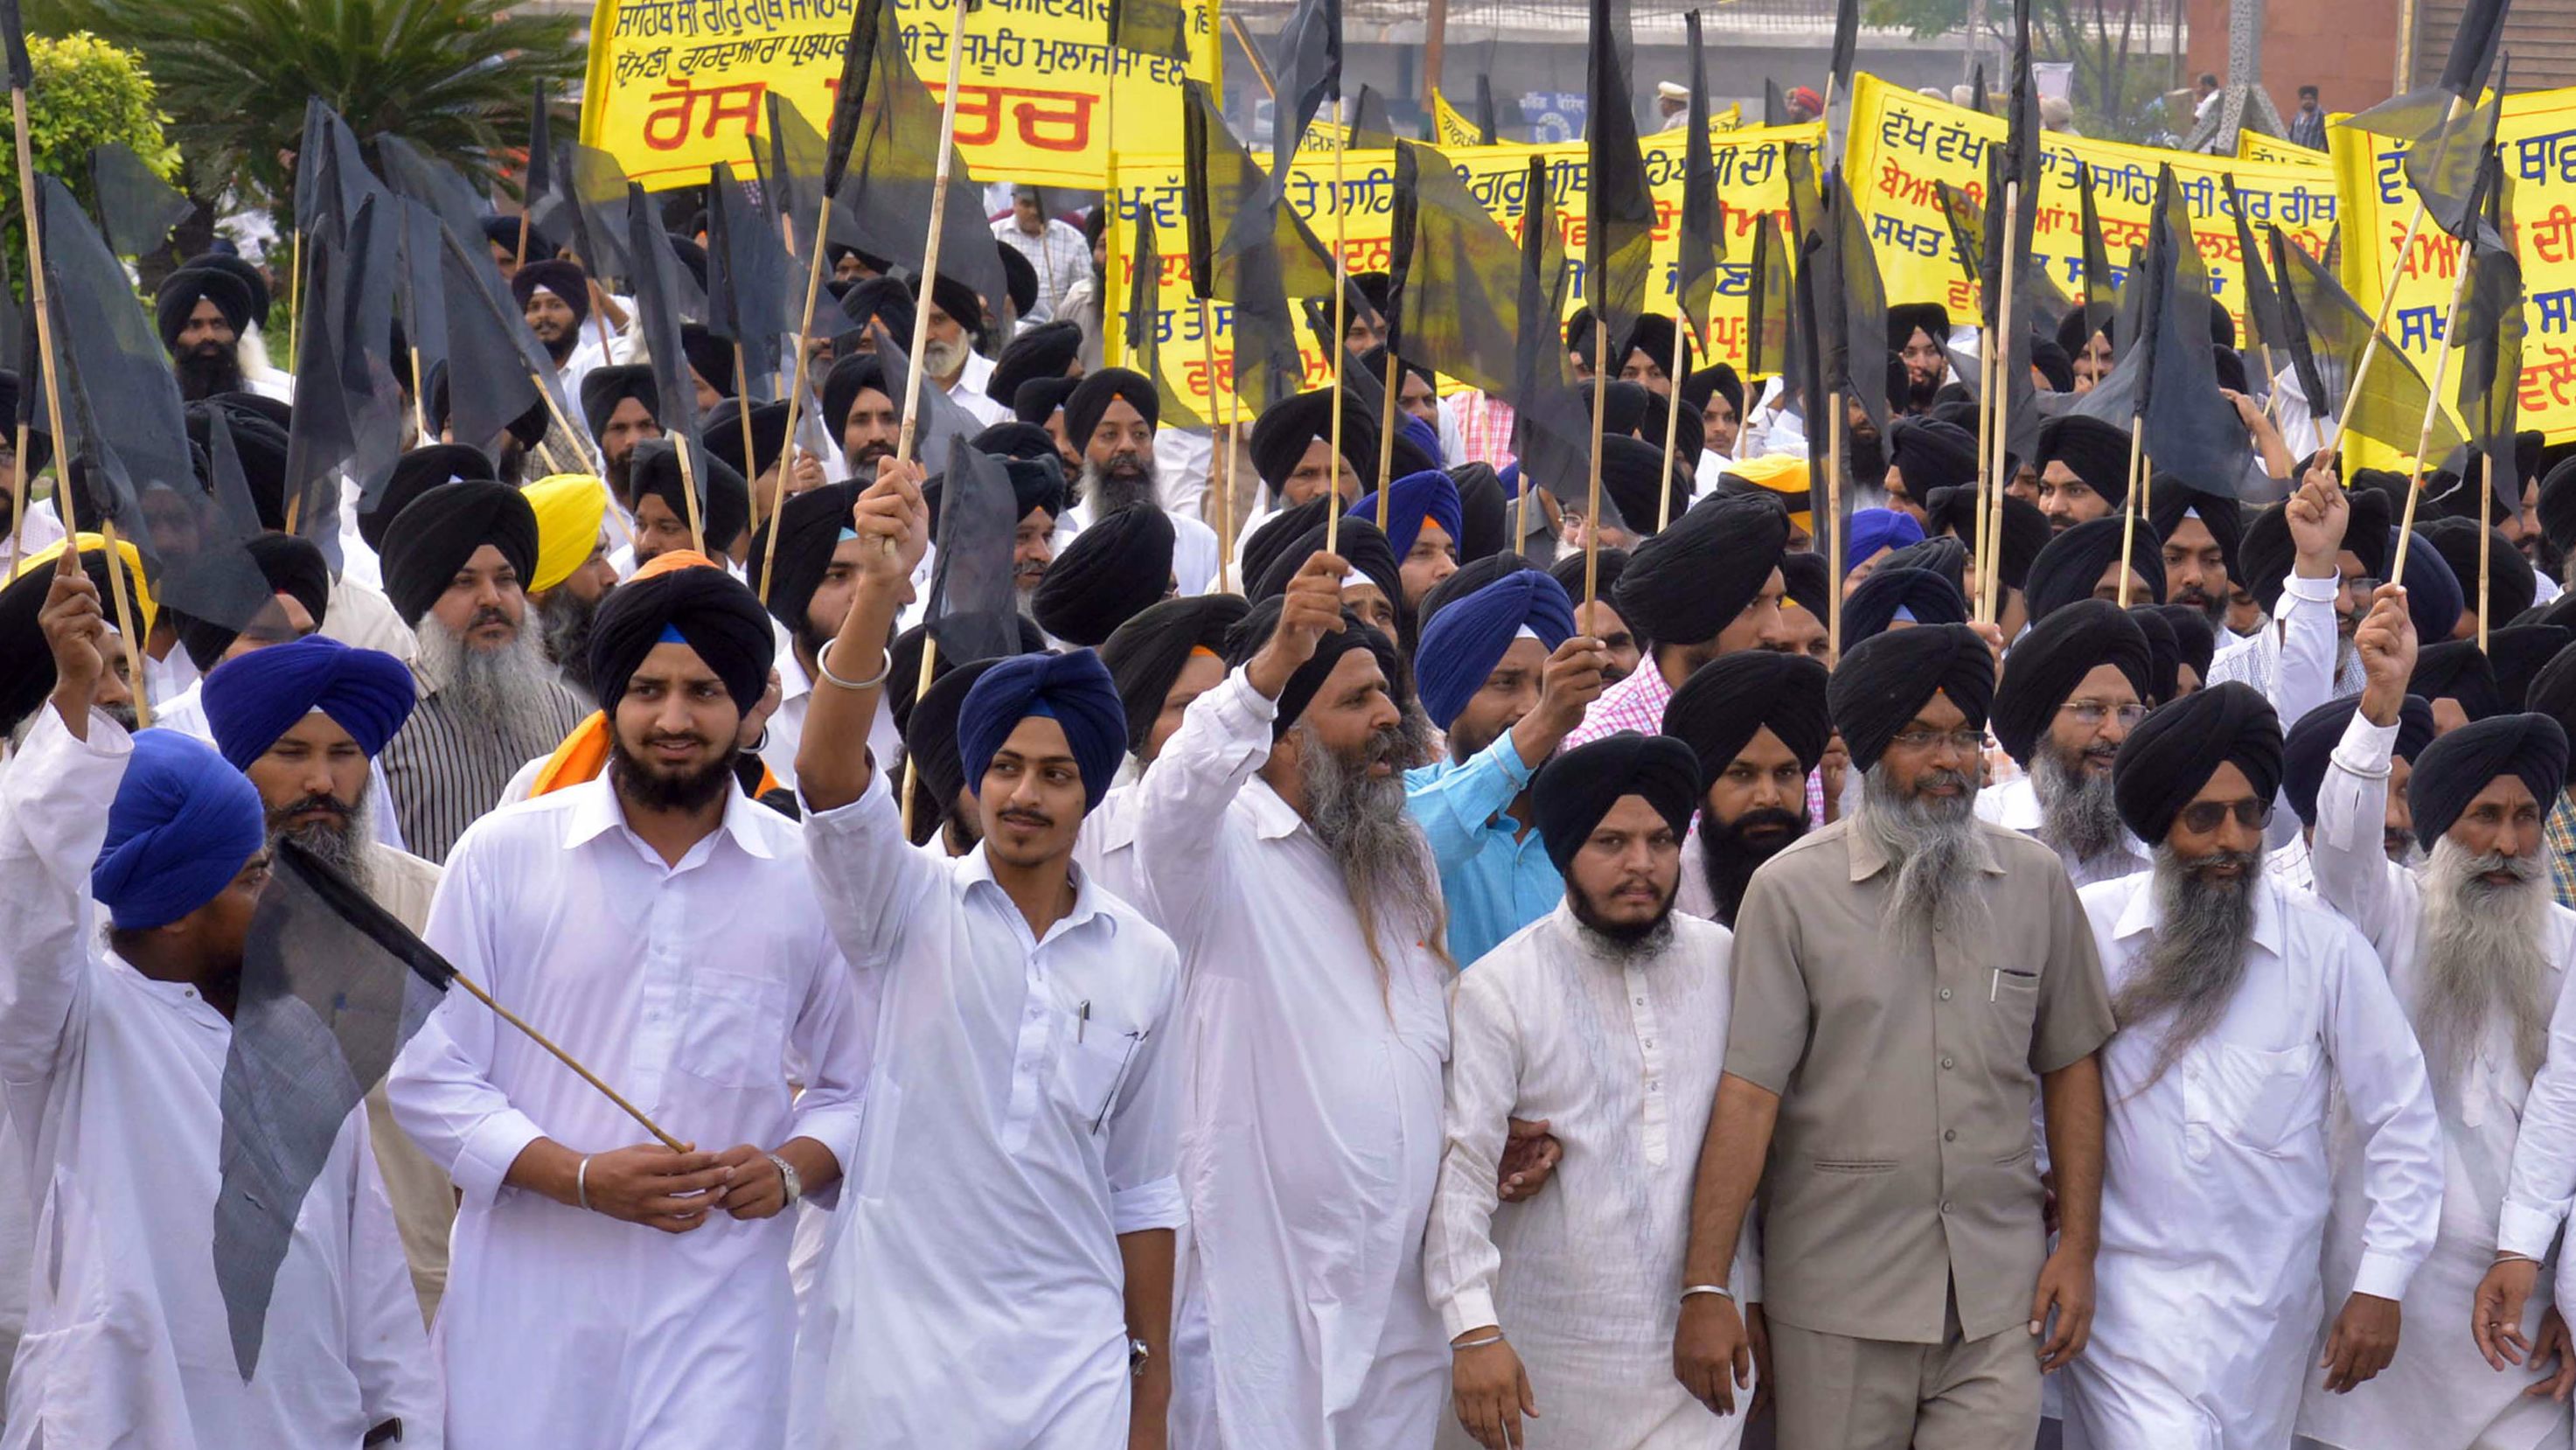 Activists from the Sikh group Shiromani Gurdwara Parbandhak Committee protest in Amritsar on October 20, 2015, against the alleged desecration of a Guru Granth Sahib, the holy book of Sikhs.  